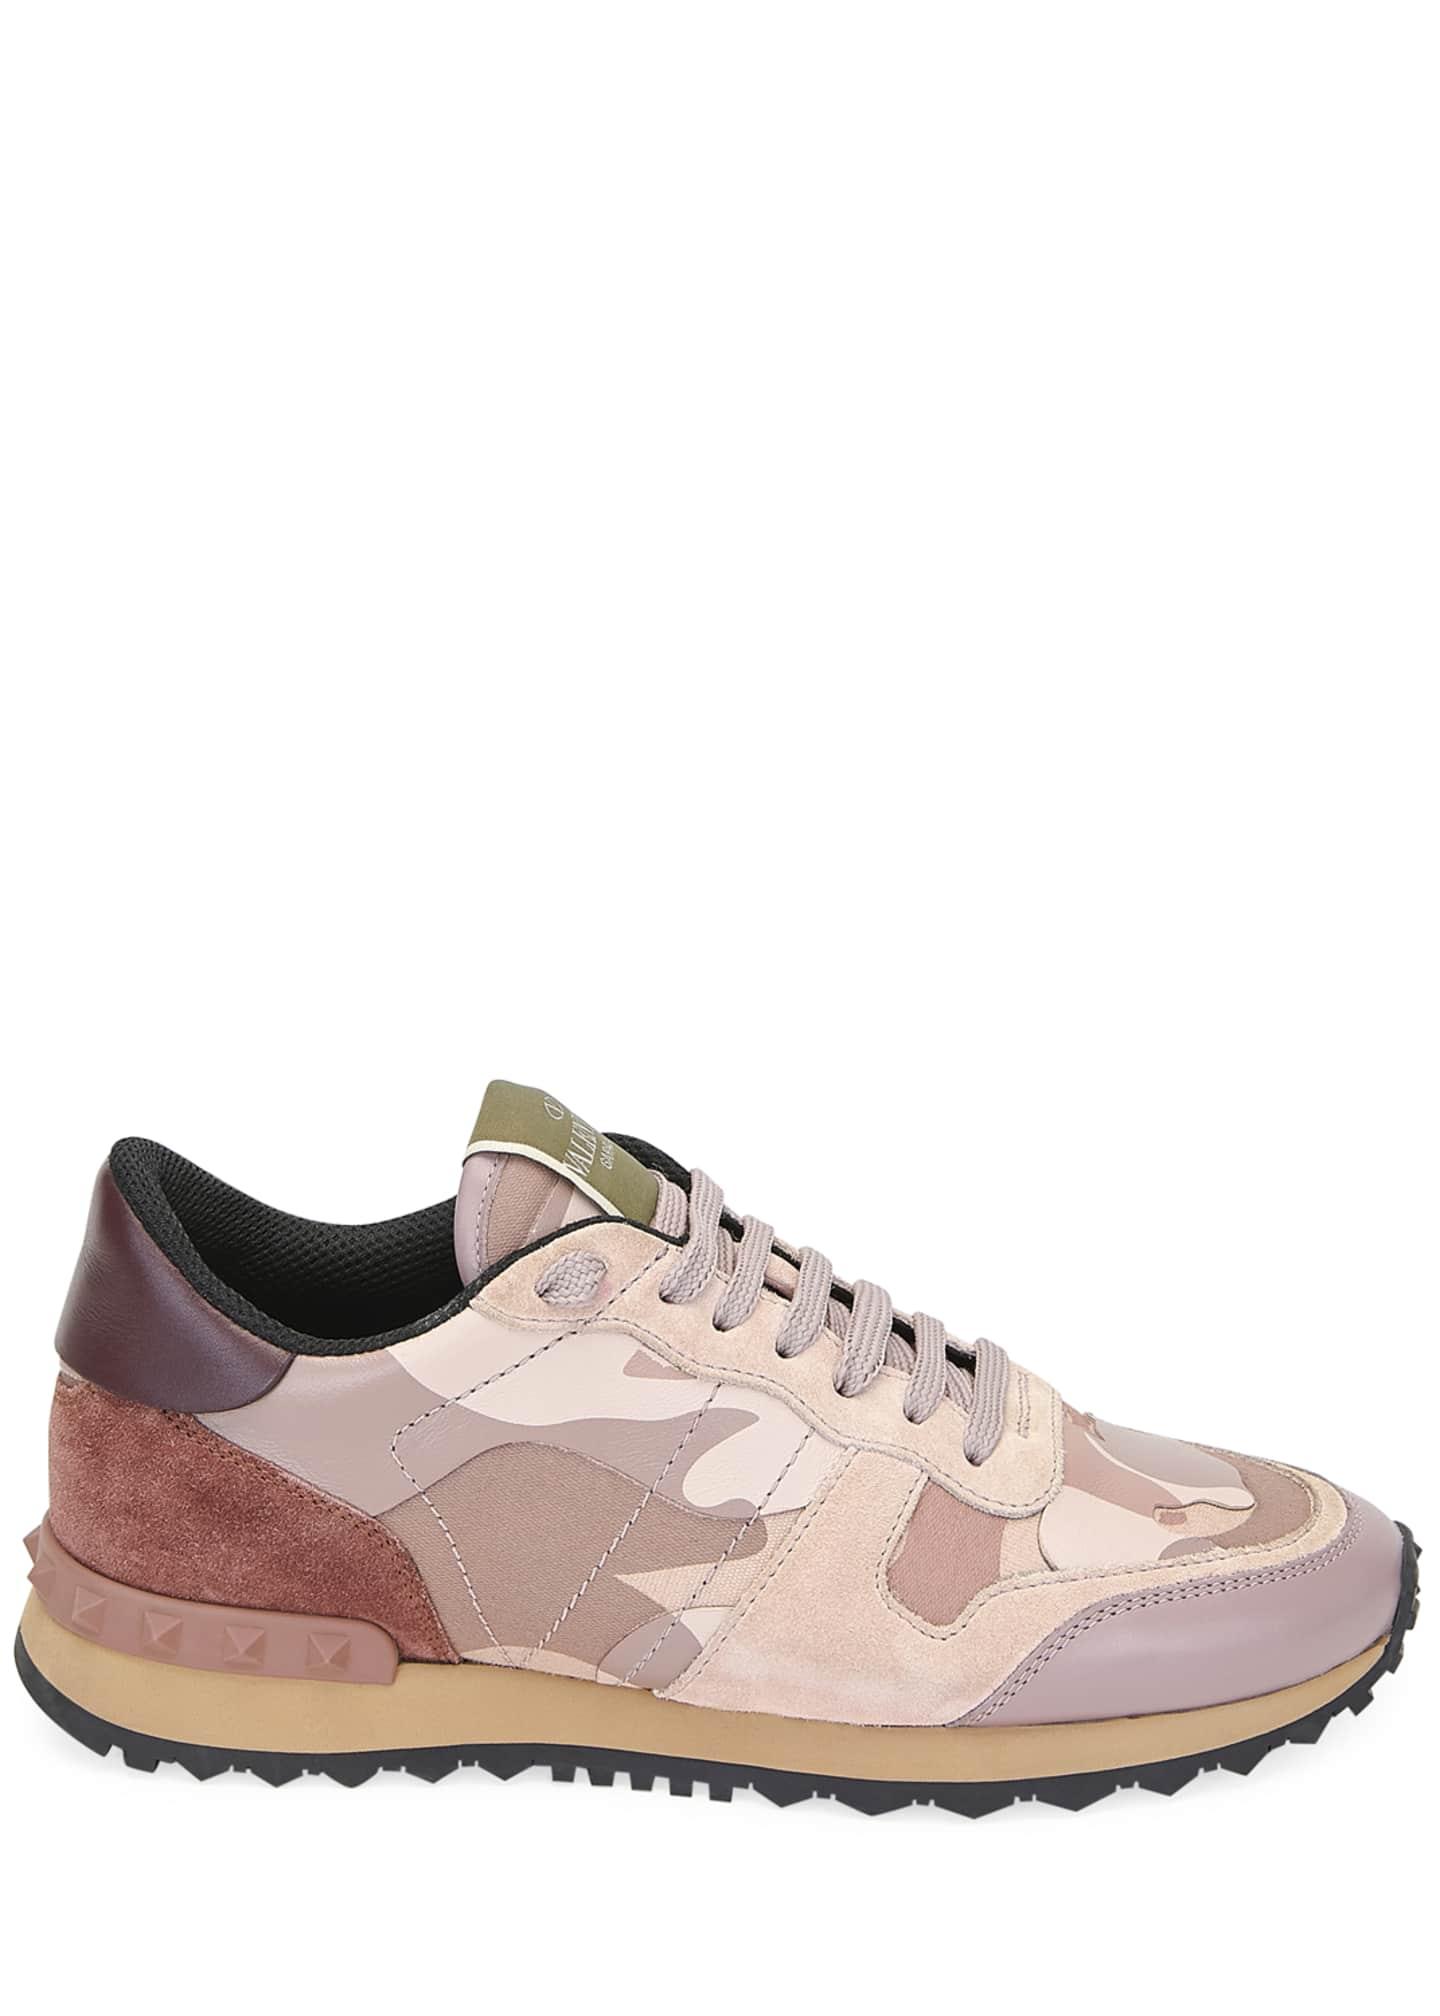 Valentino Garavani Leather Rockrunner Camo Lace-up Sneakers in Pink - Lyst